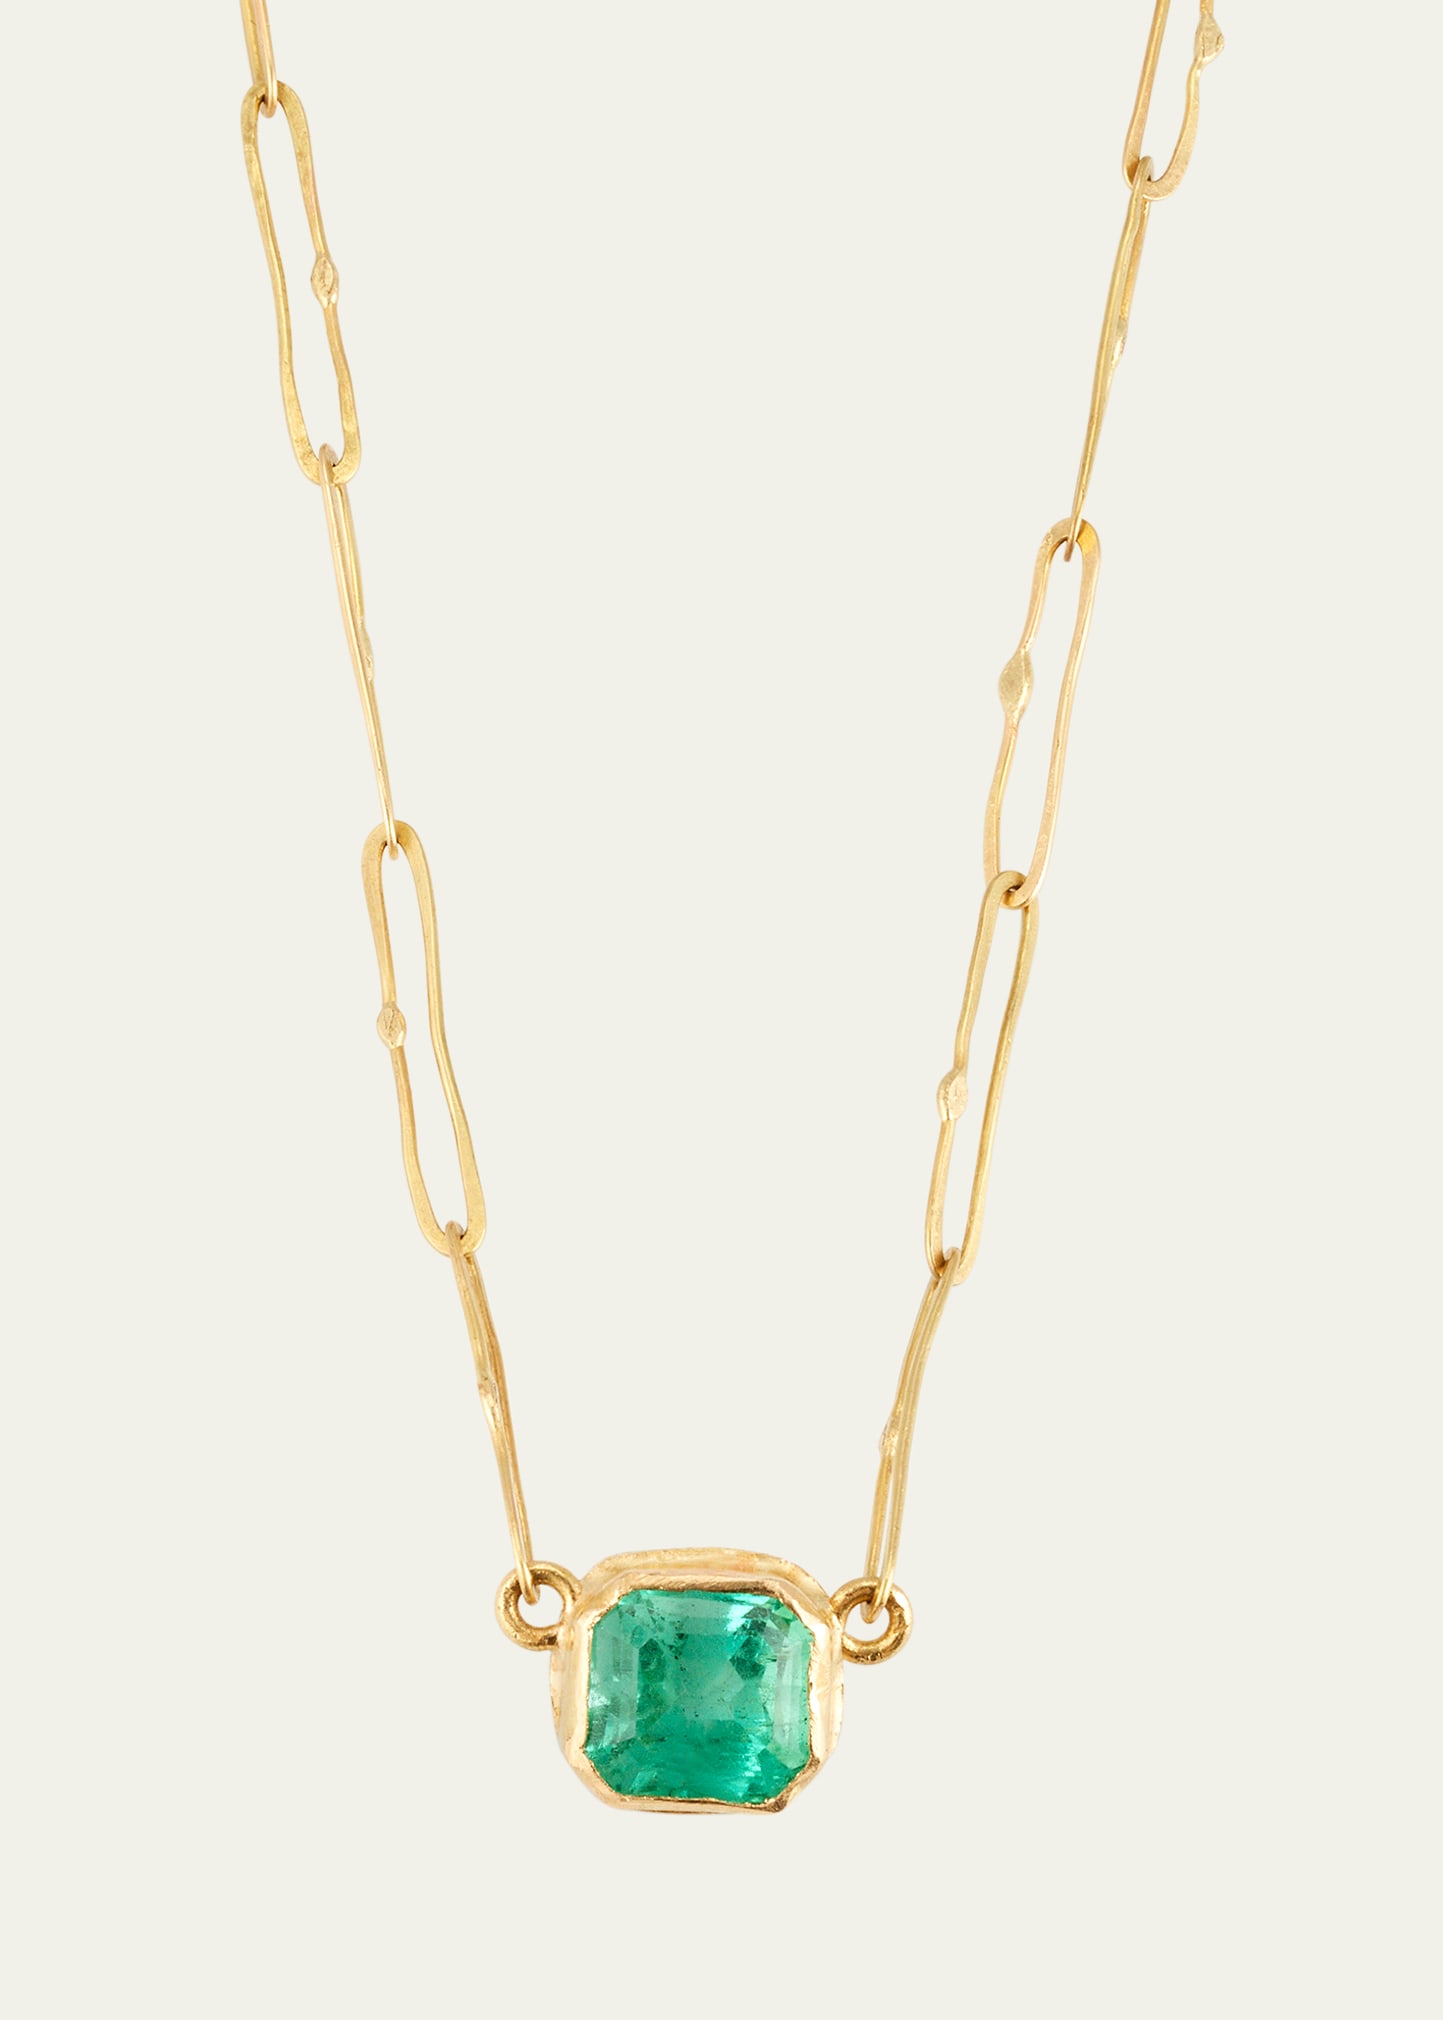 18K Yellow Gold Square Colombian Emerald Necklace, 17"L